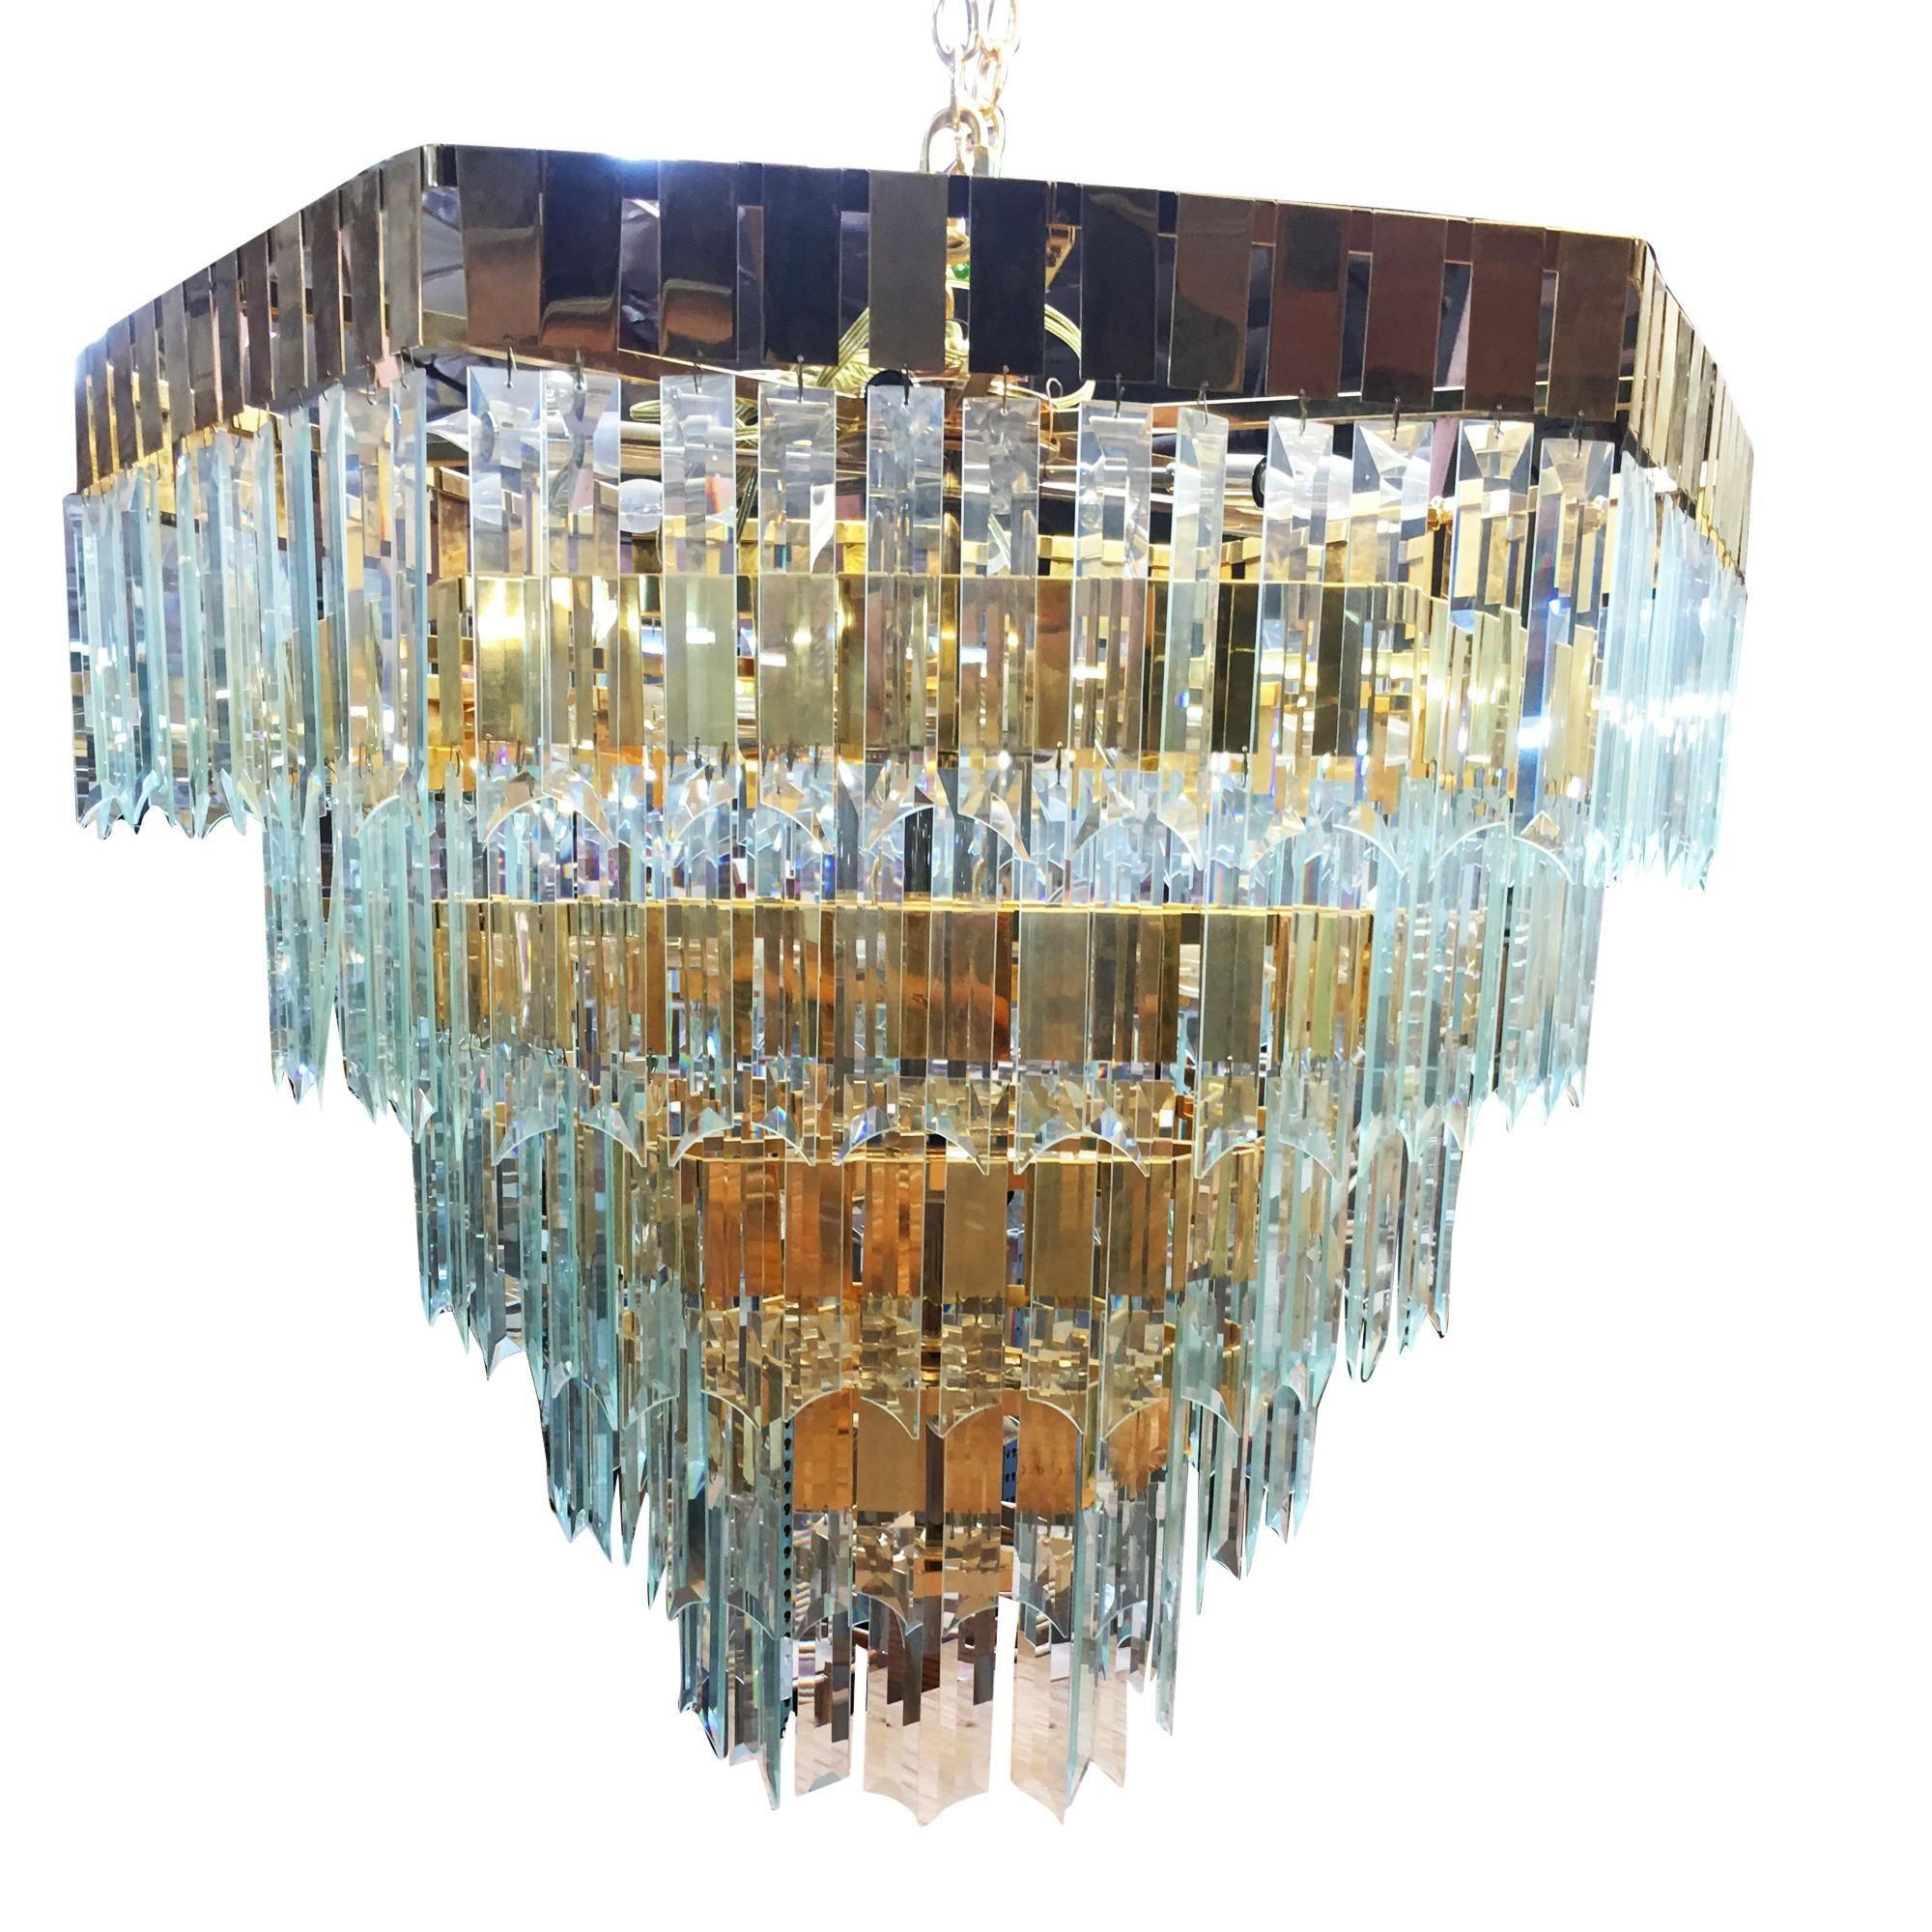 Modernist hanging crystal brass chandelier featuring a 5-level brass framed chandelier holding over 300 cut crystal pieces of crystal, circa 1970s. Each crystal piece is connected to a flat brass hook which easily hangs on the chandelier frame. The